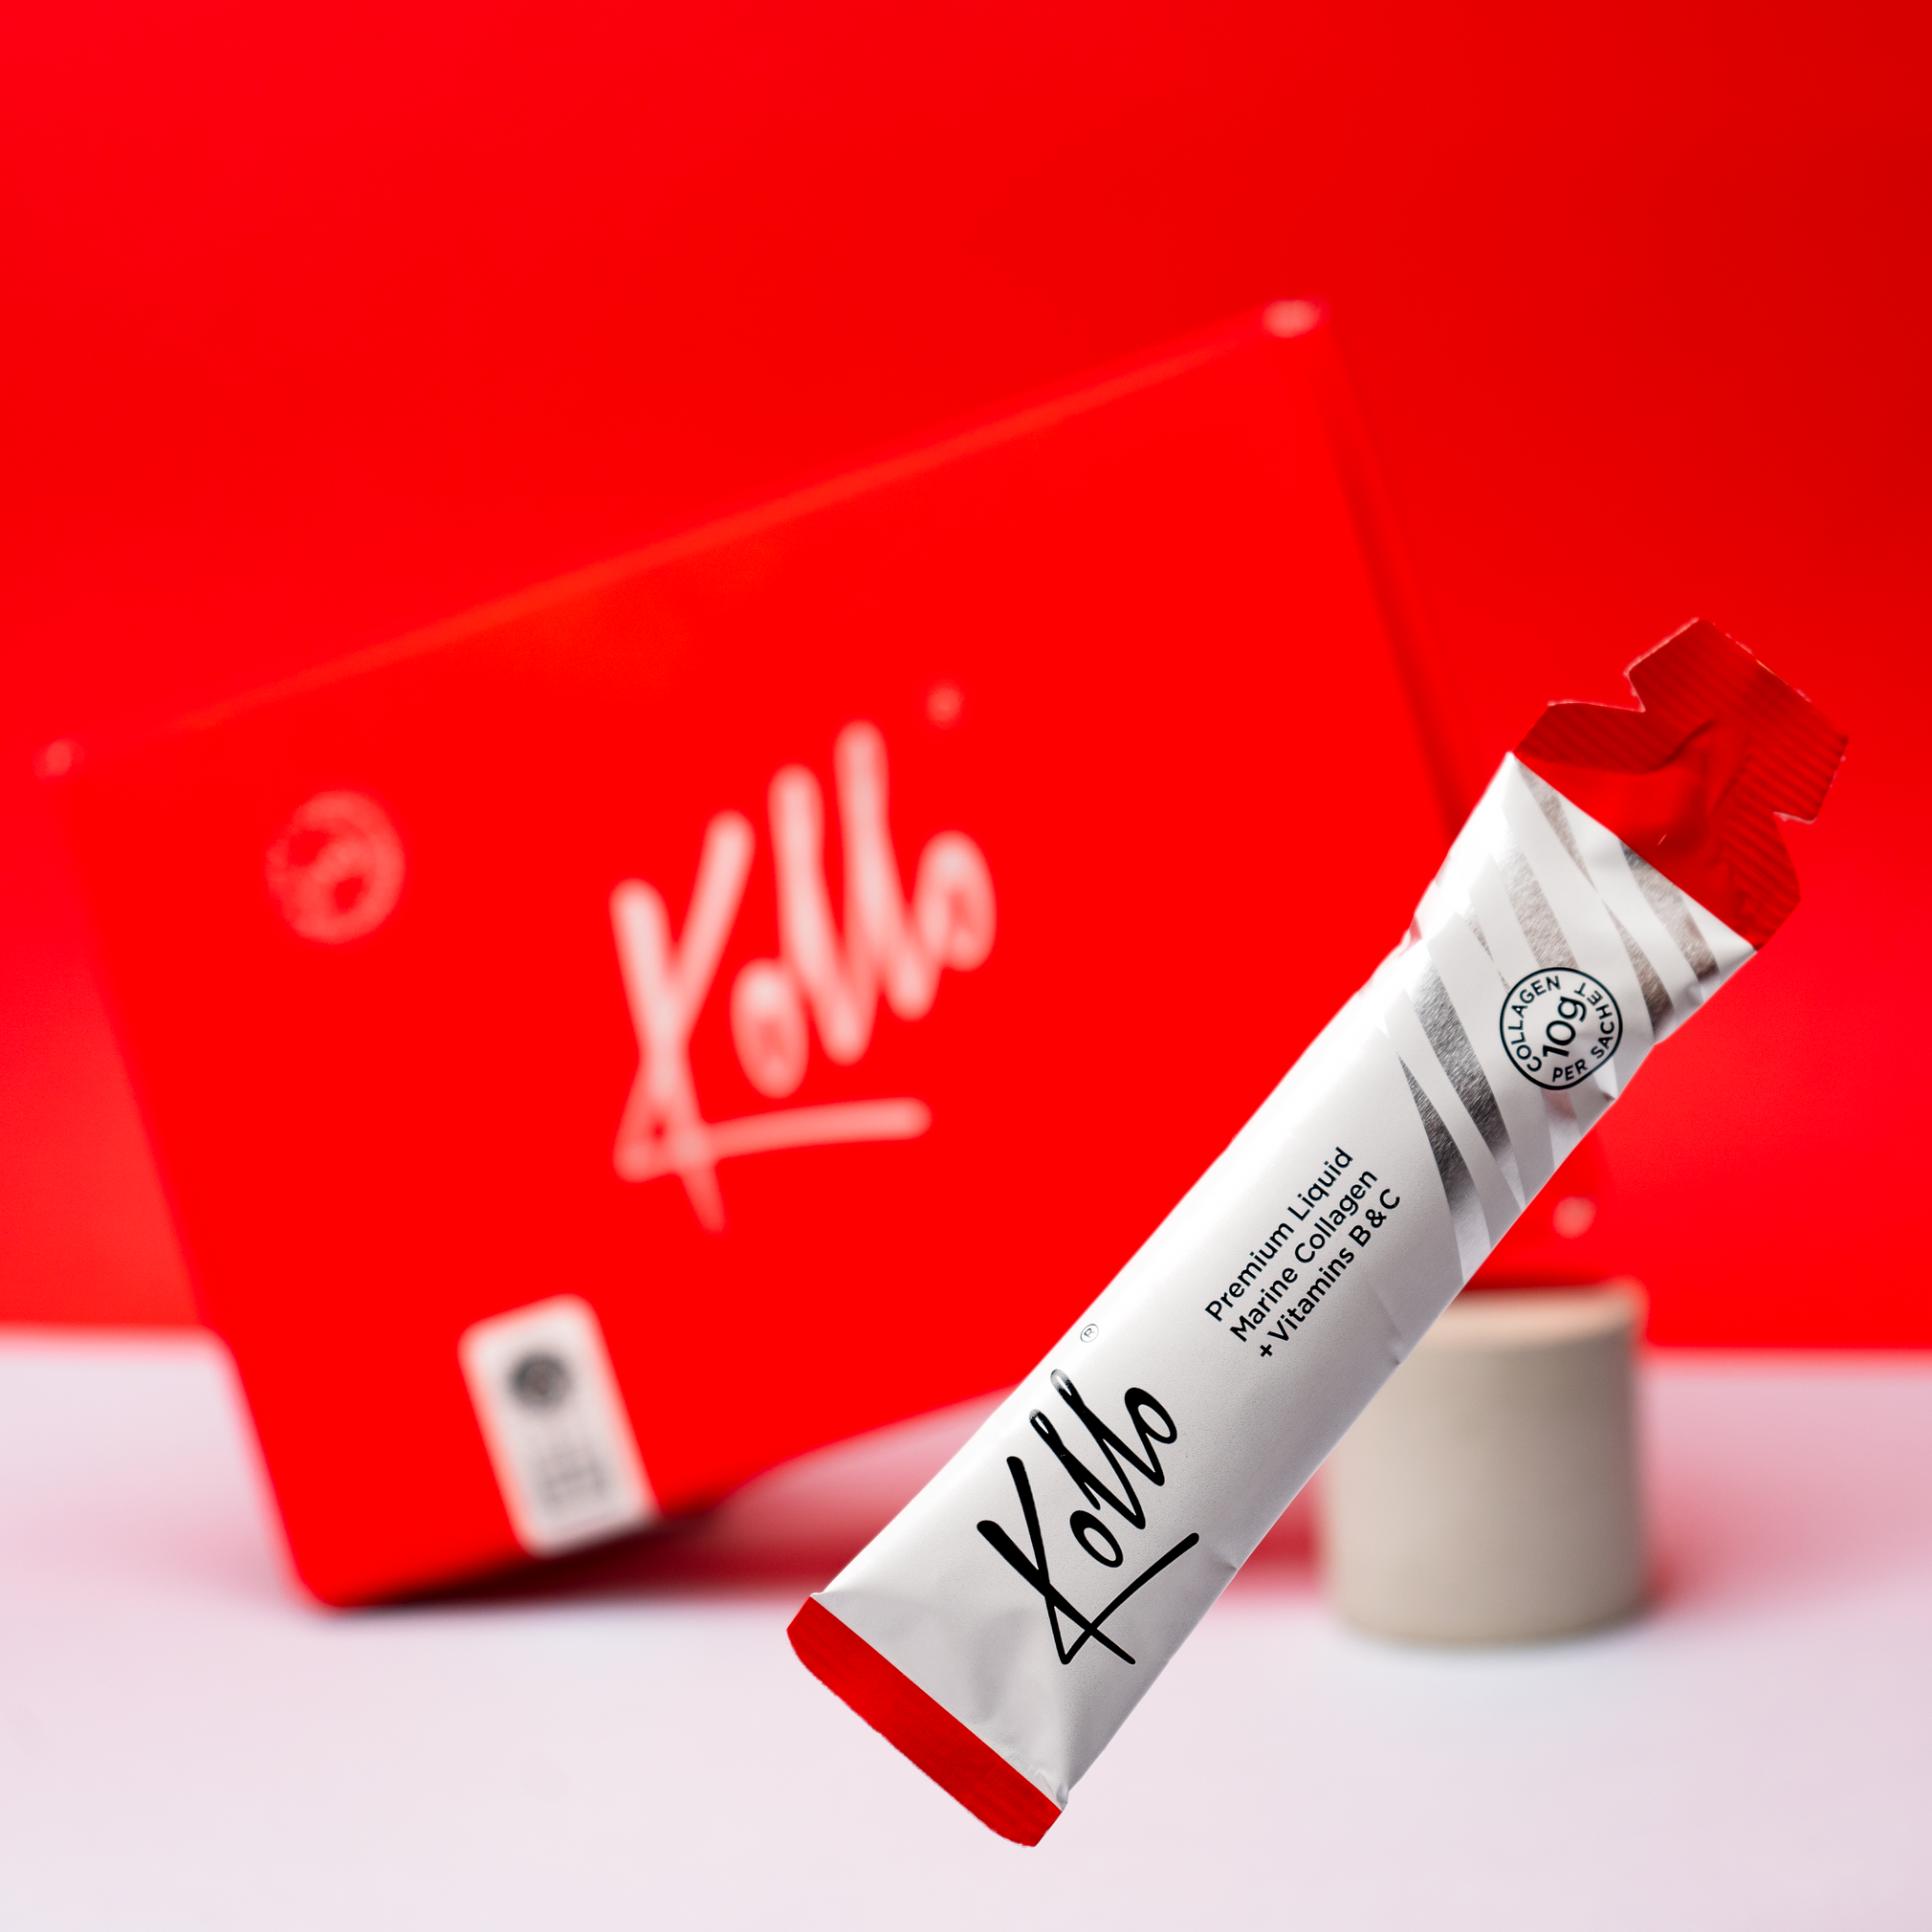 How marine collagen supplements like Kollo could help with ageing